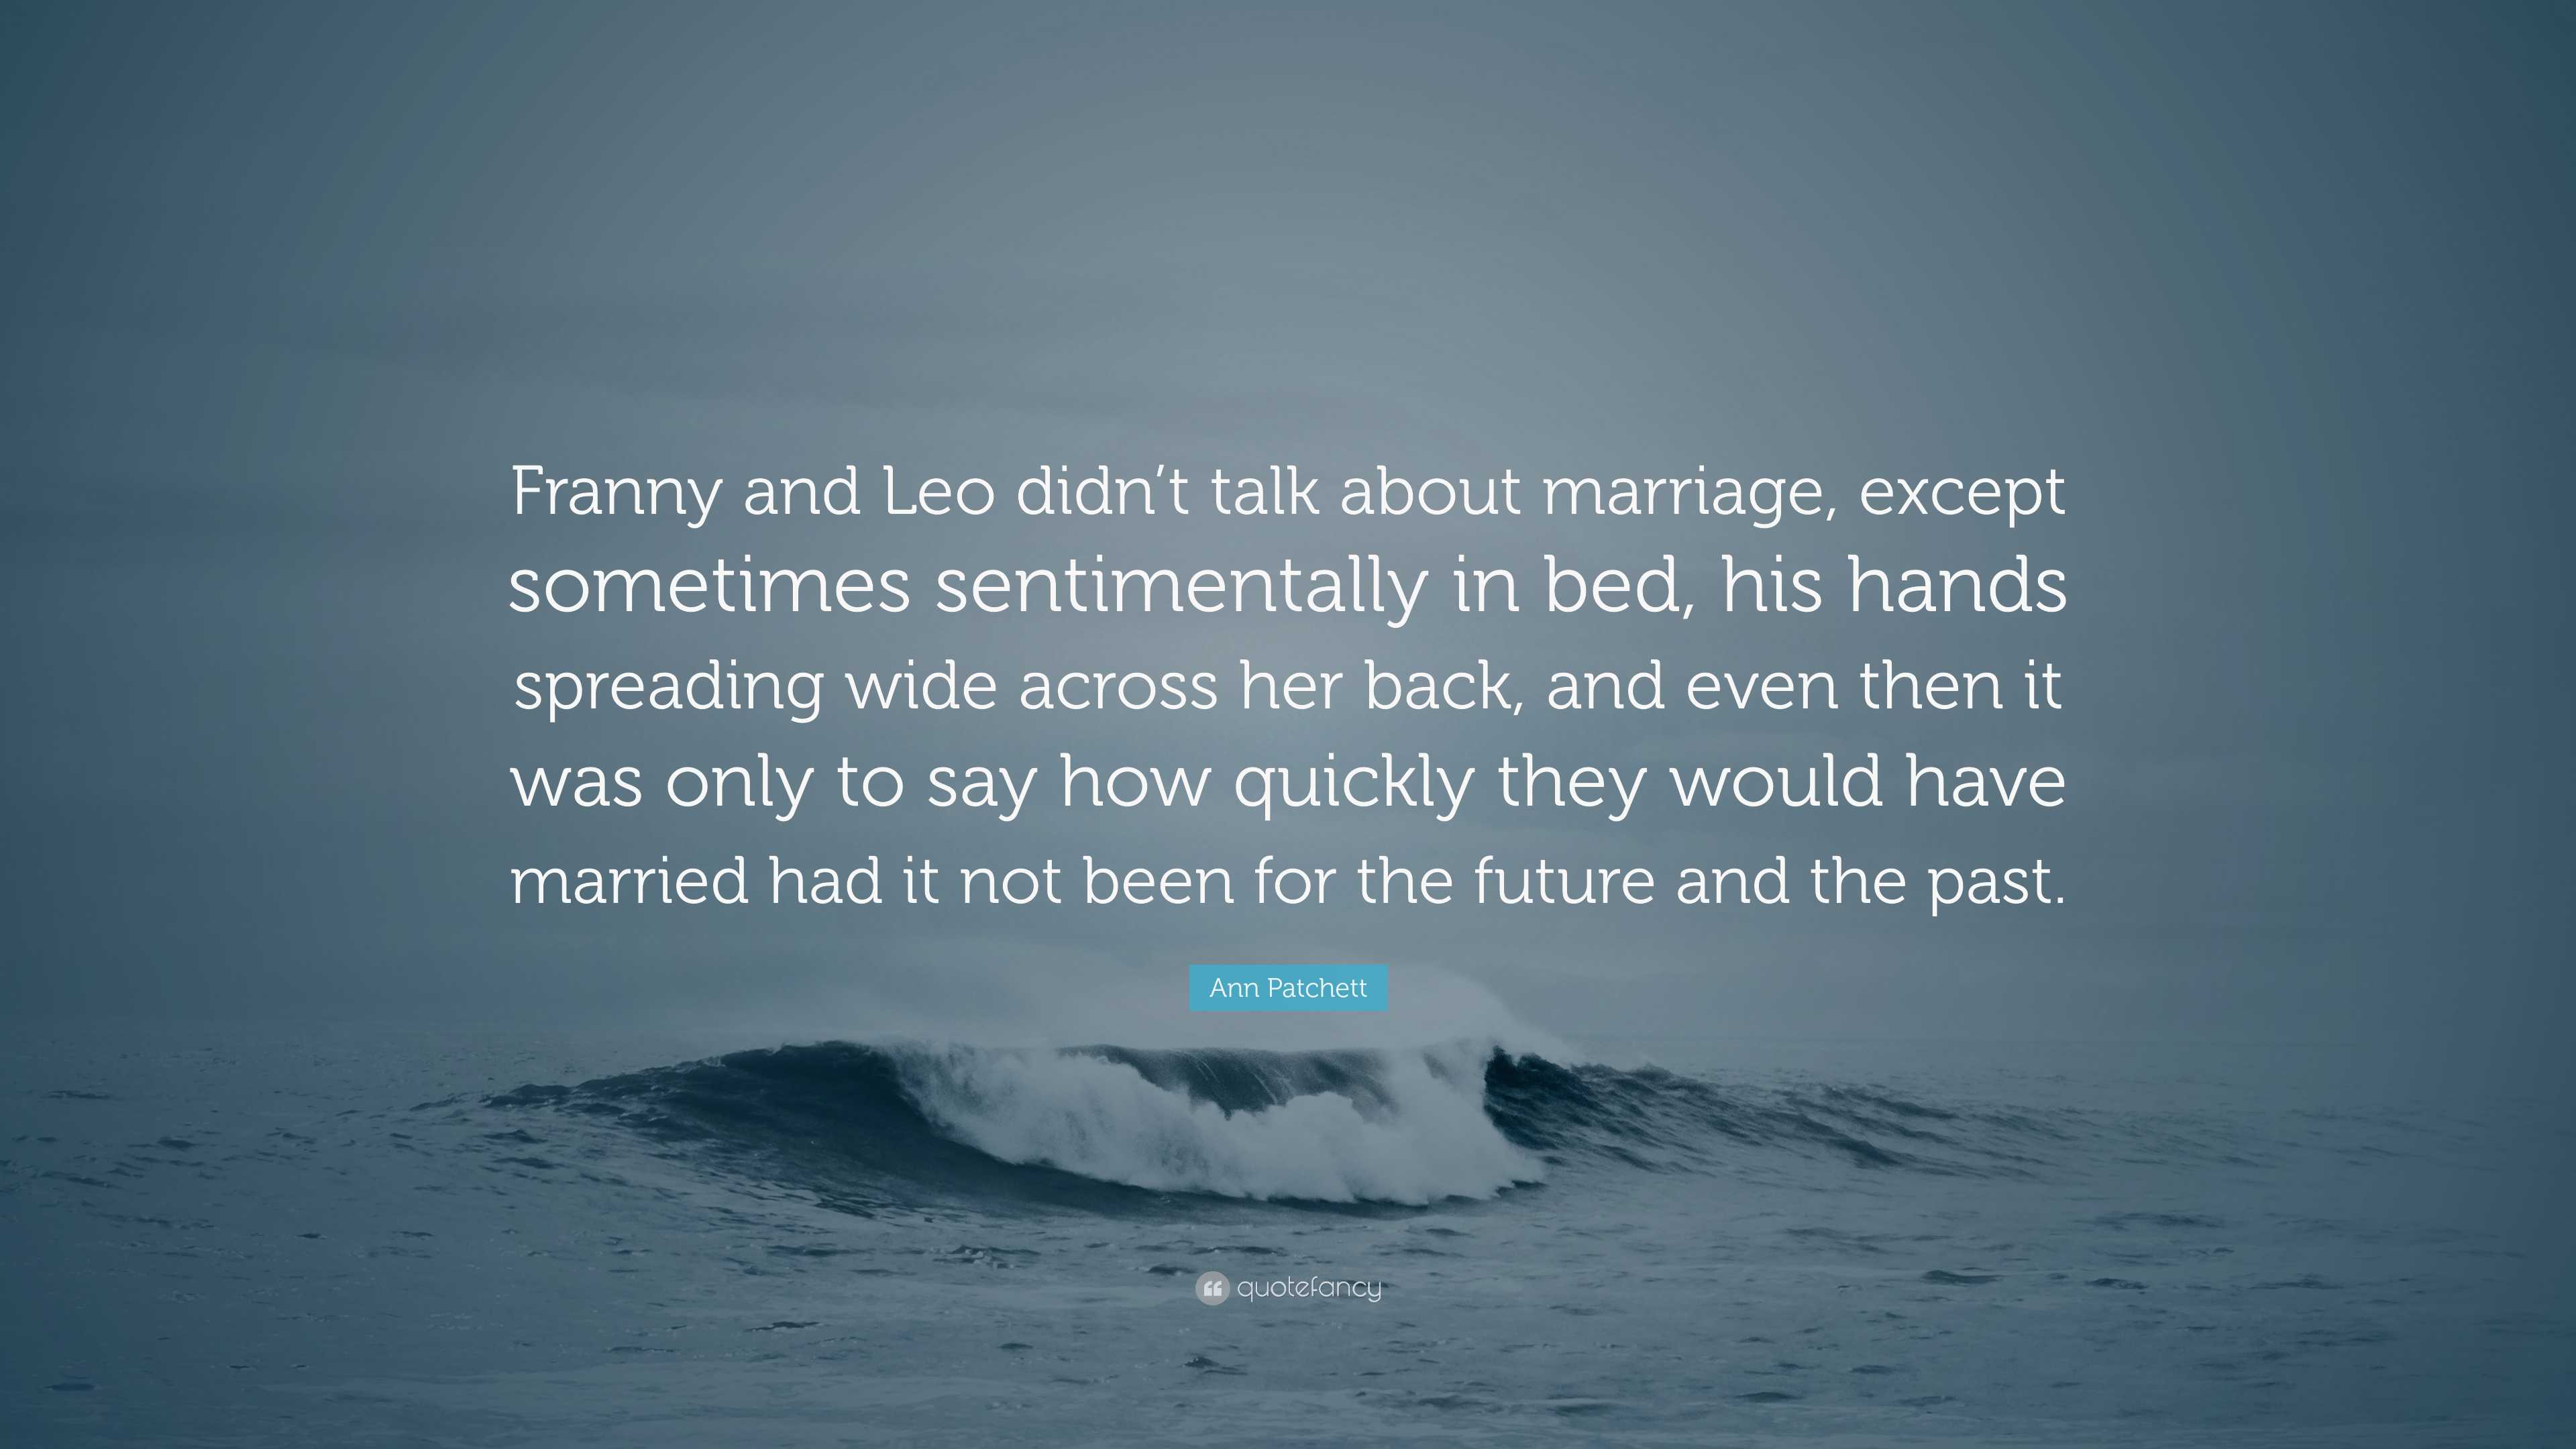 Ann Patchett Quote: “Franny and Leo didn’t talk about marriage, except ...